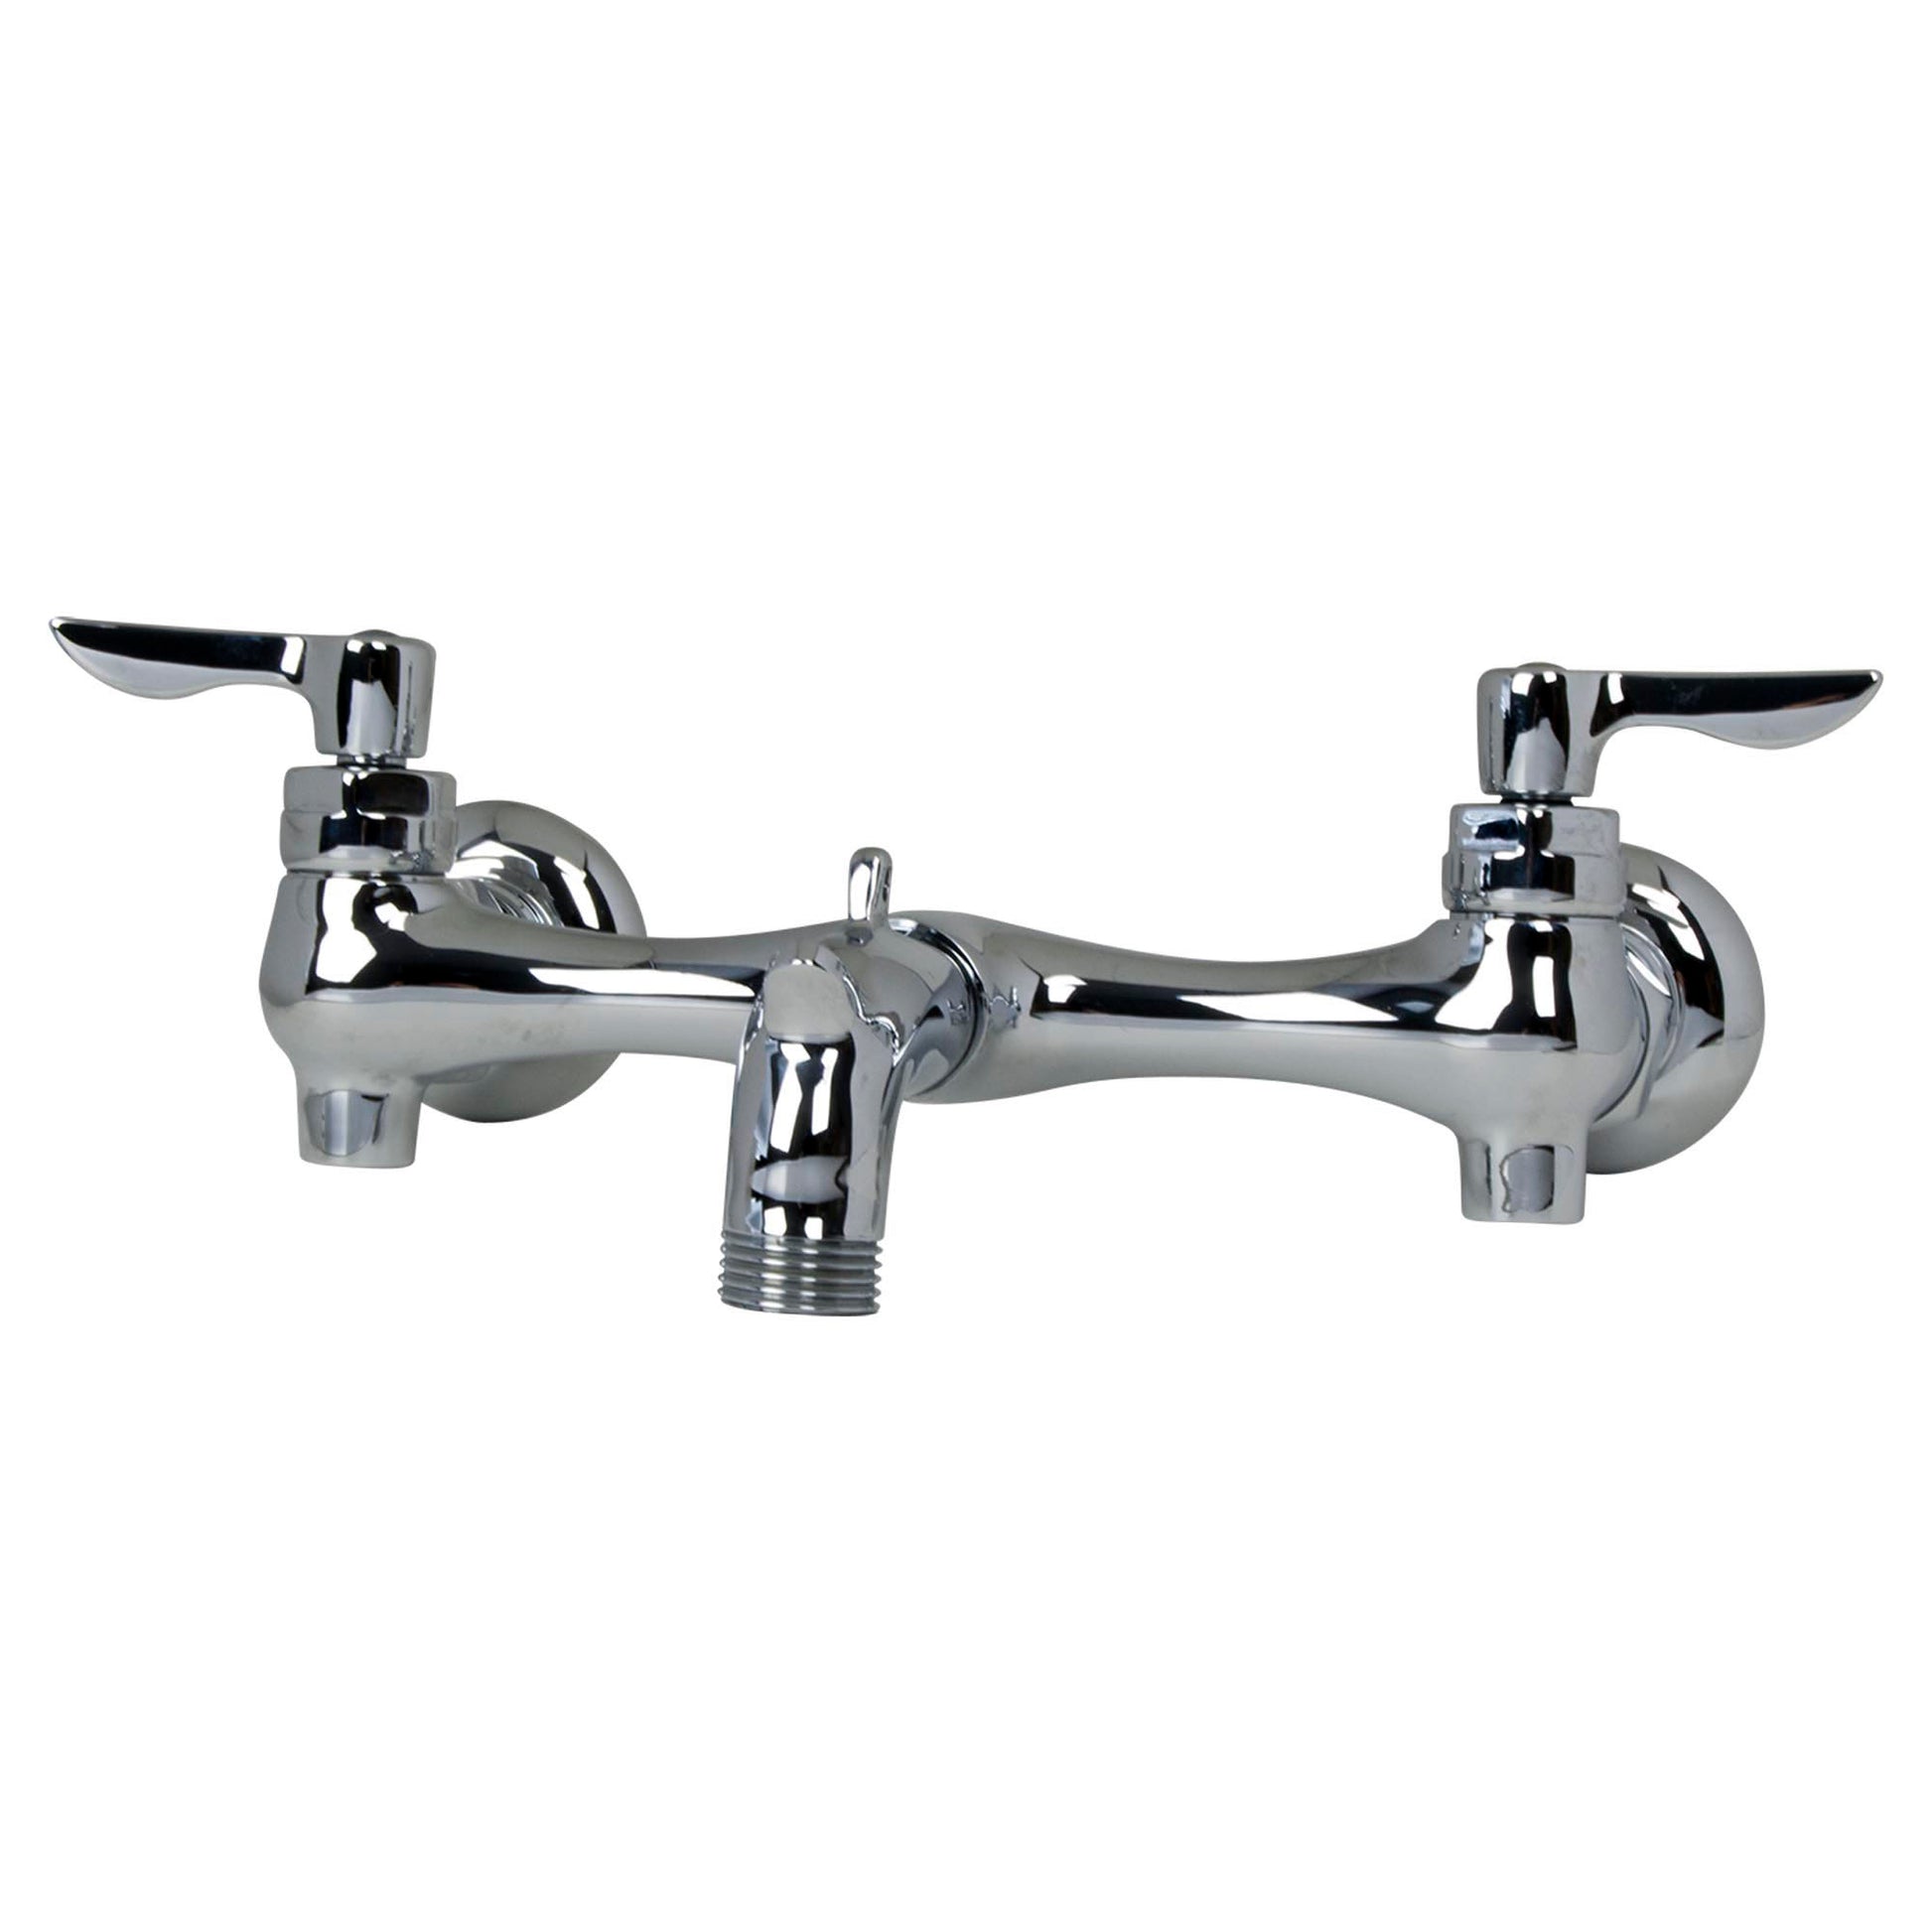 AMERICAN-STANDARD 8350235.002, Wall-Mount Service Sink Faucet With 3-Inch Spout in Chrome